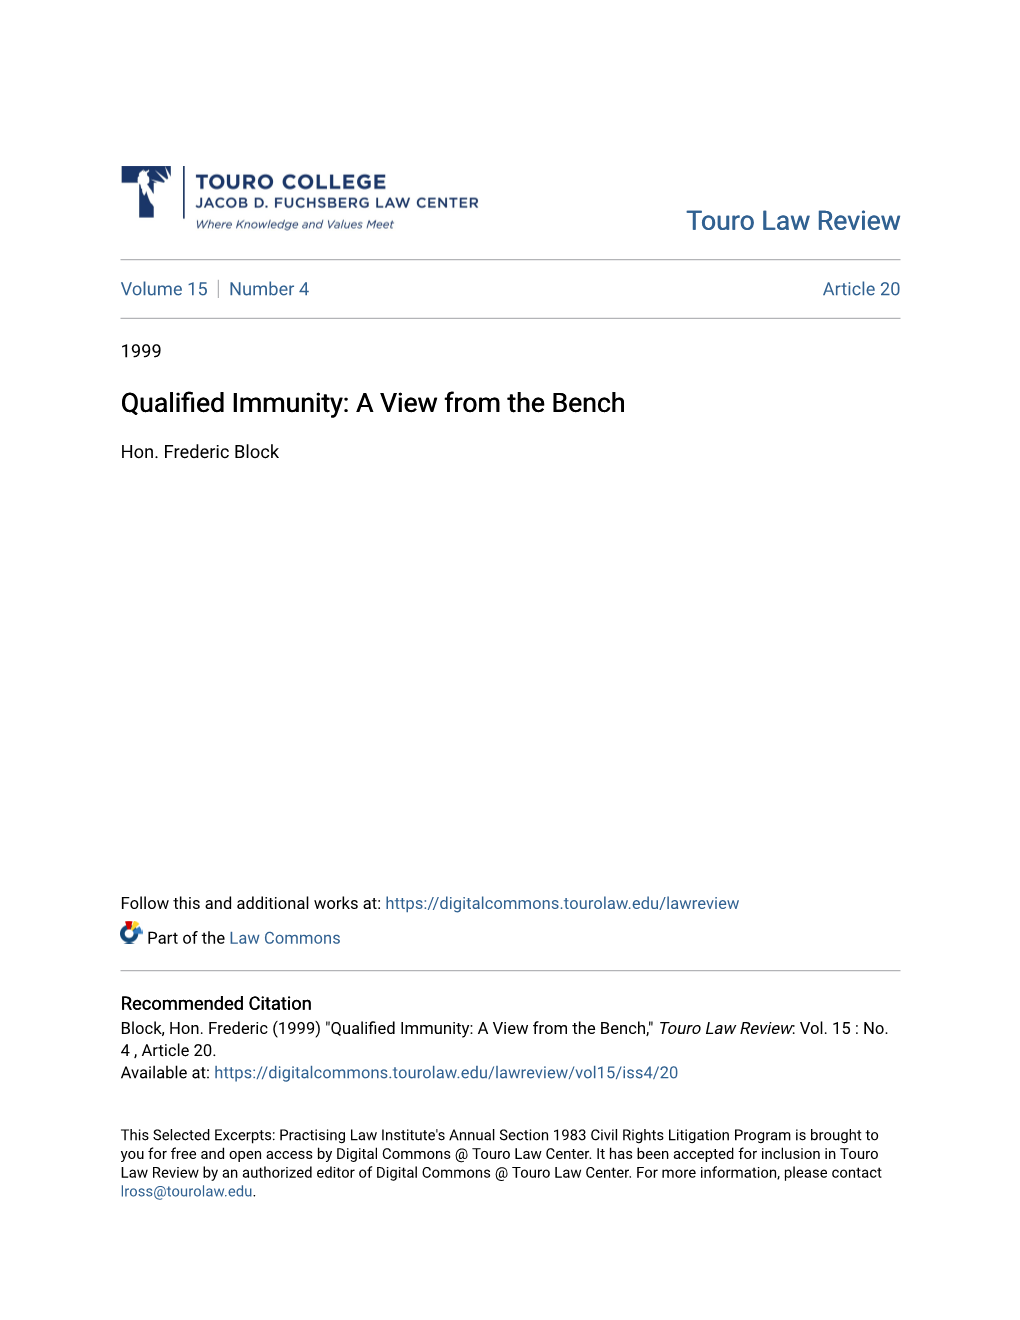 Qualified Immunity: a View from the Bench